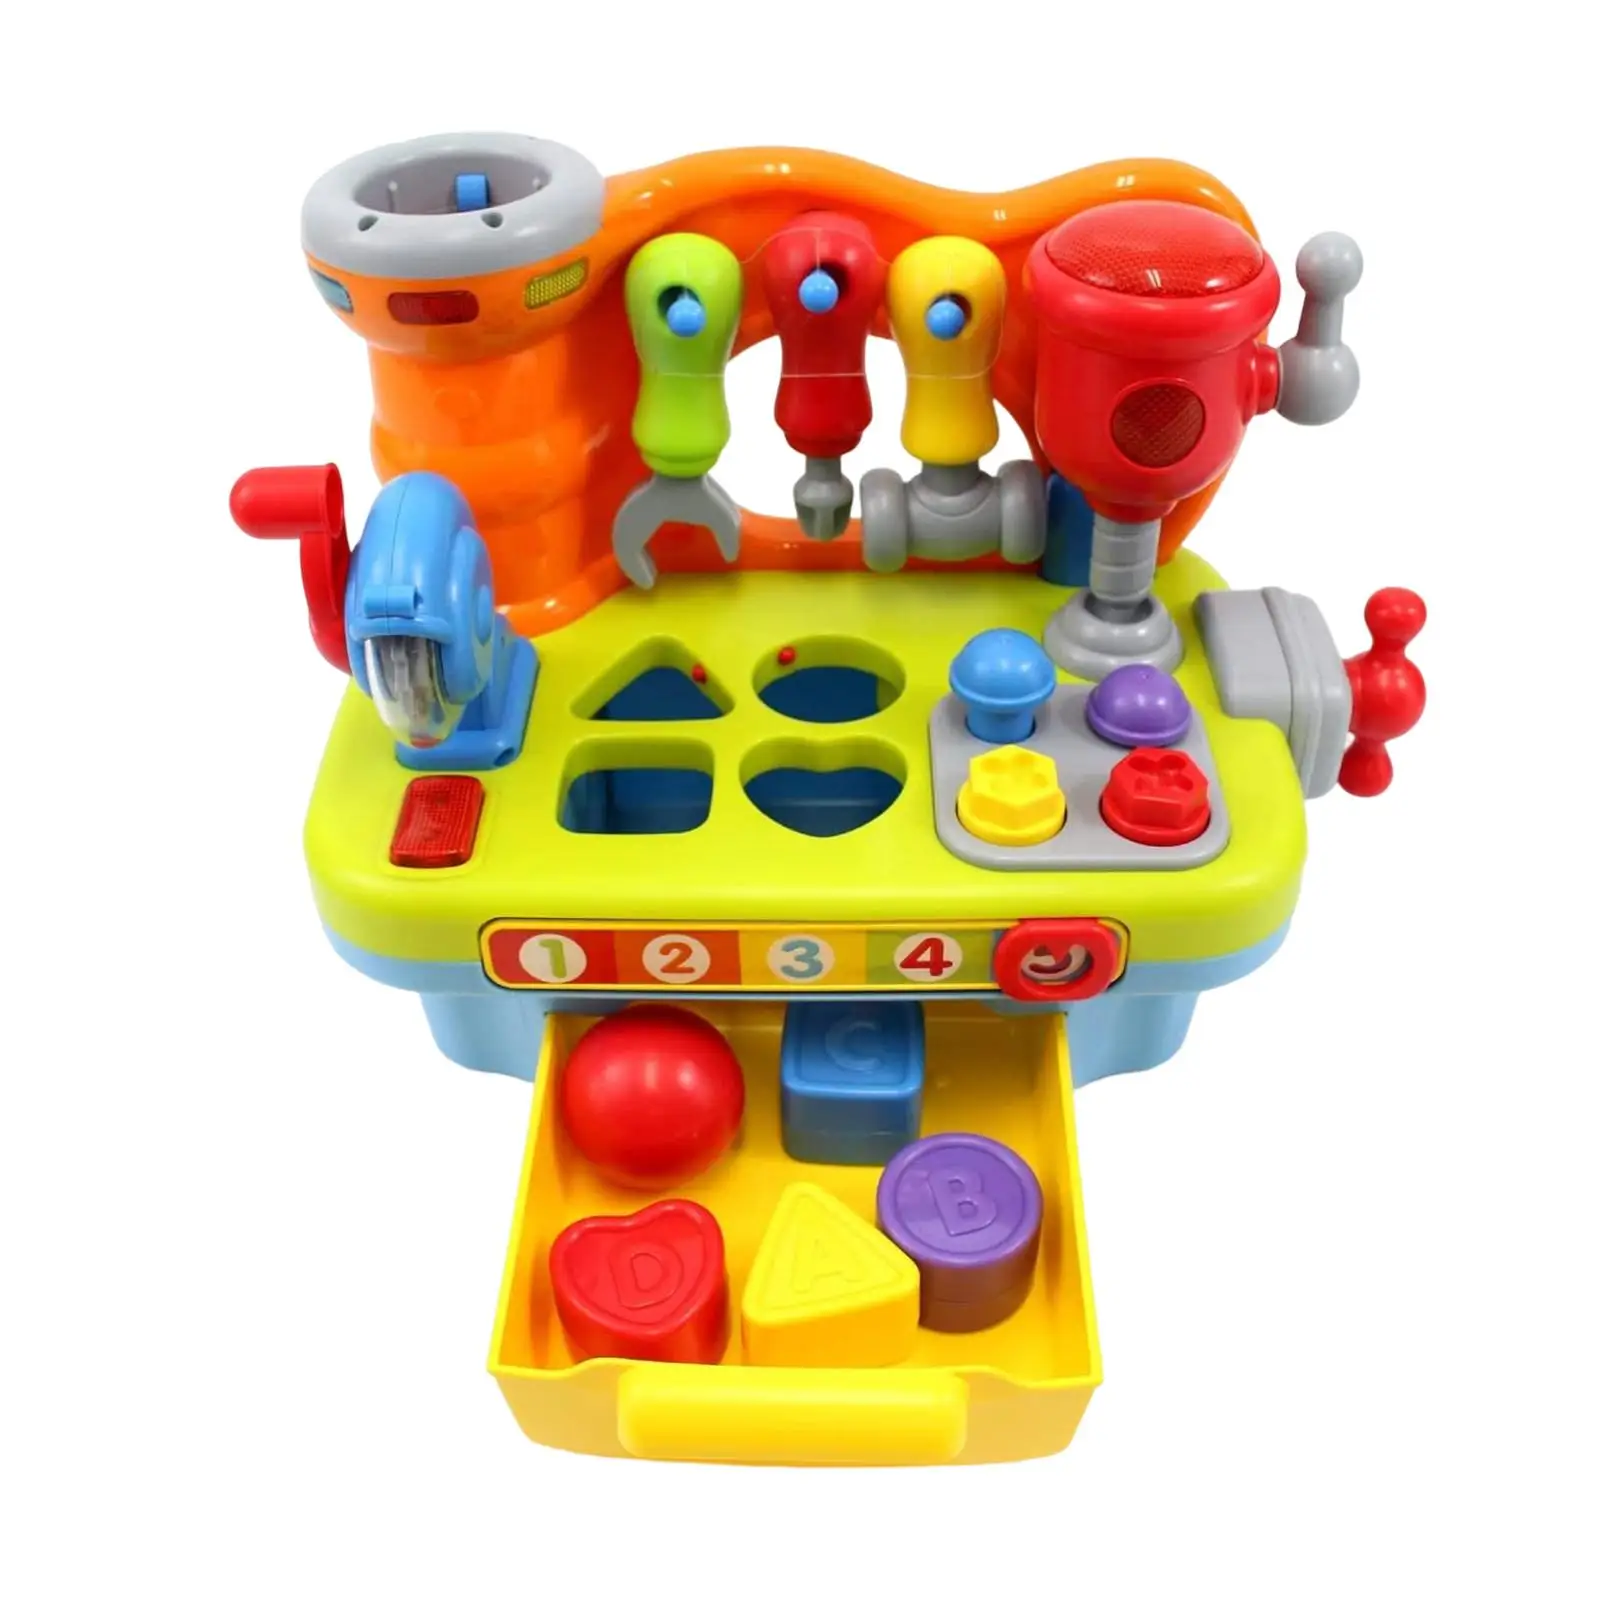 Funny Workbench Toys Gift with Light Toddler Developing Girls Fine Motor Skills Birthday Work Station DIY Interactive Play Game